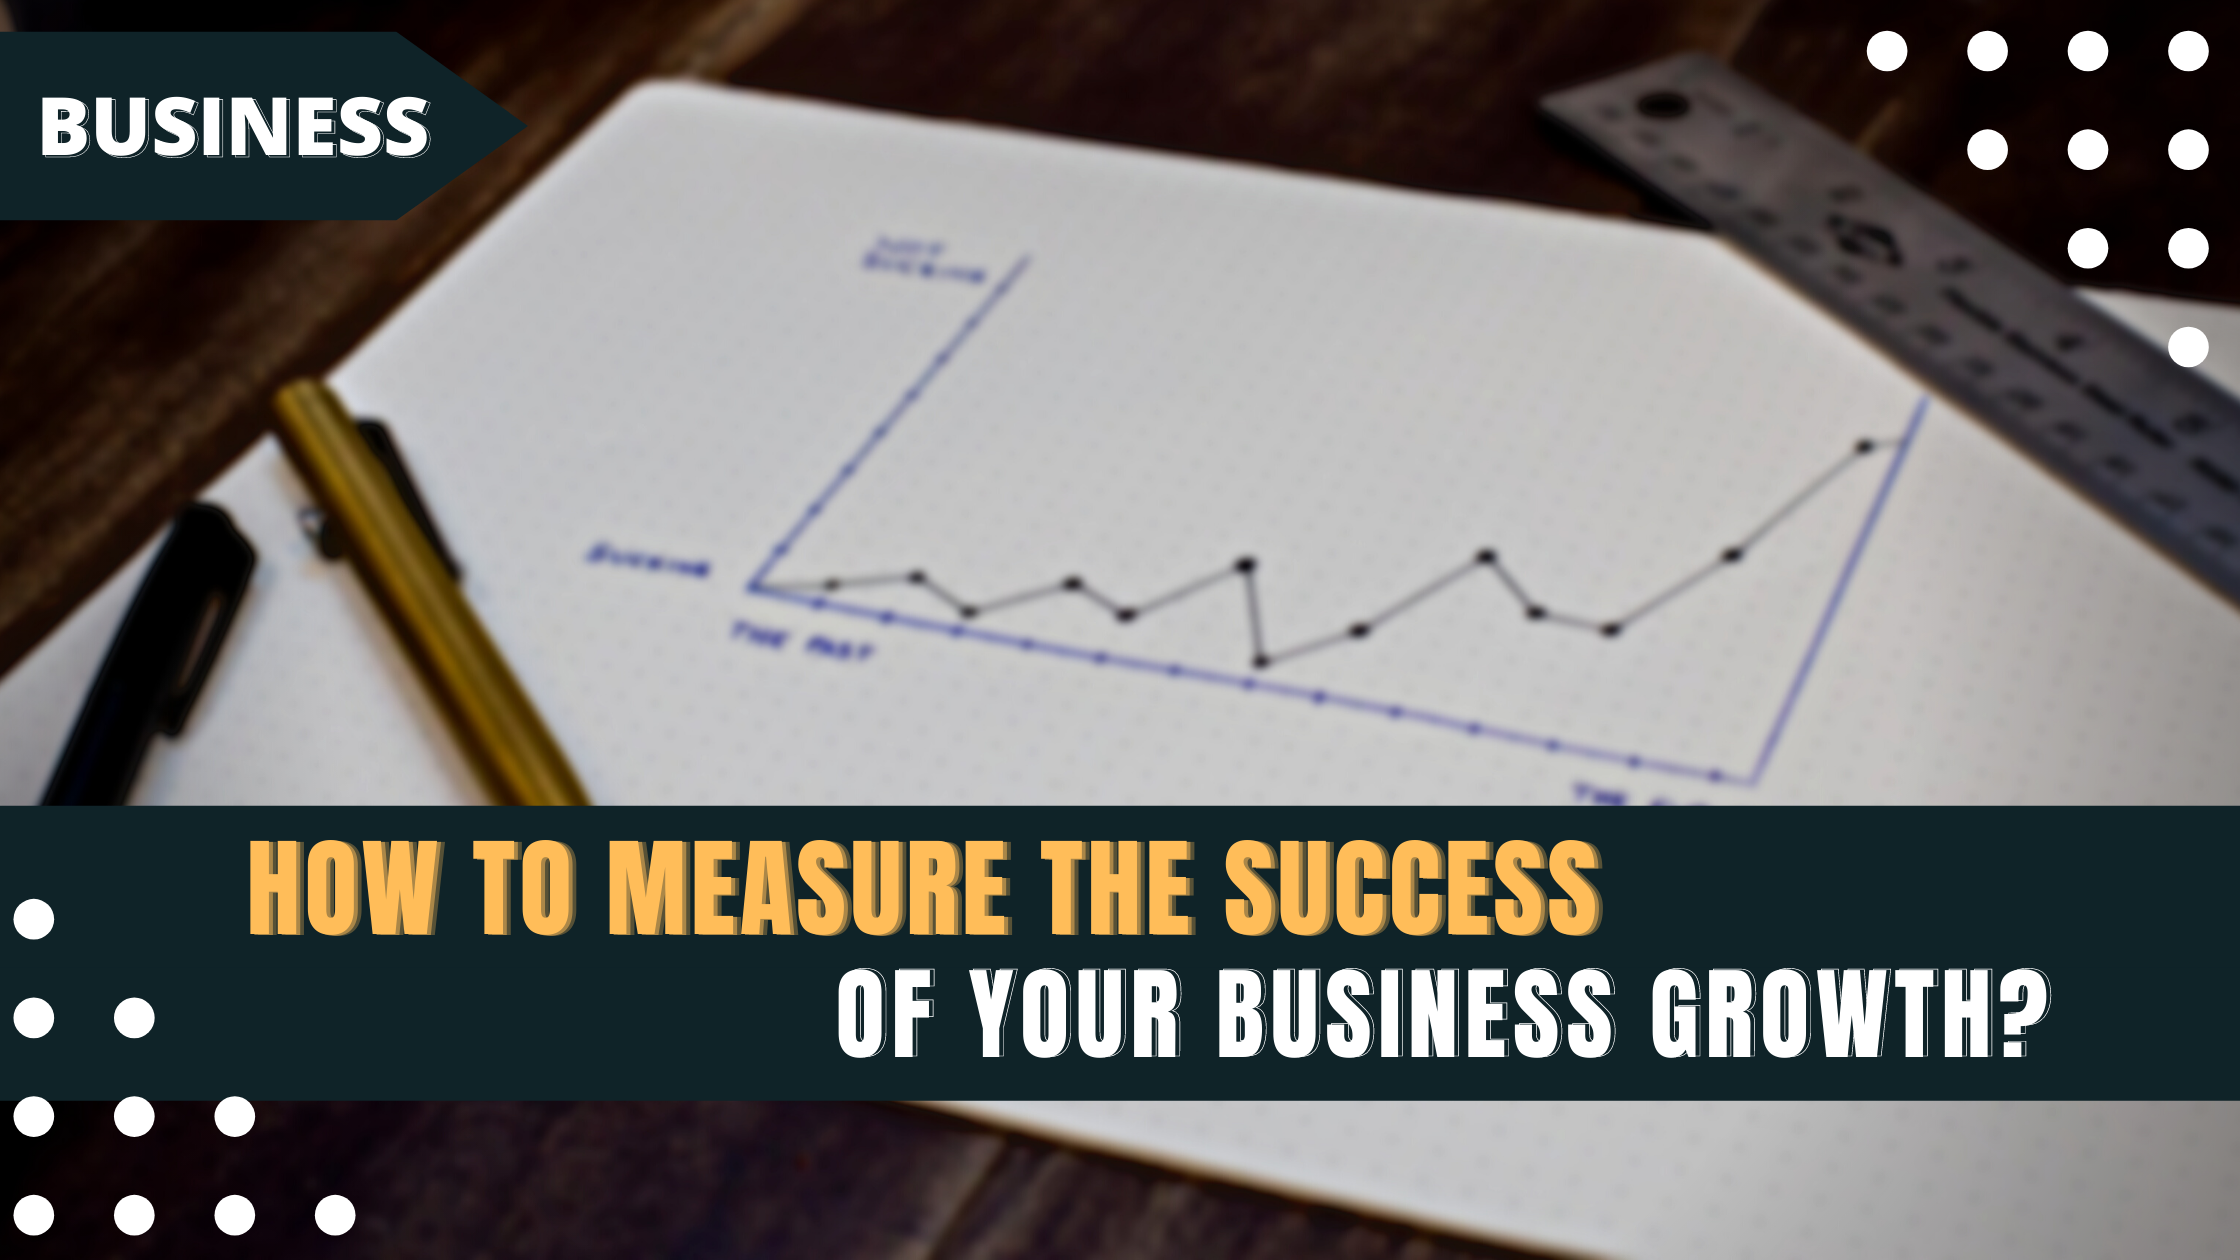 How to measure the success of your business growth?